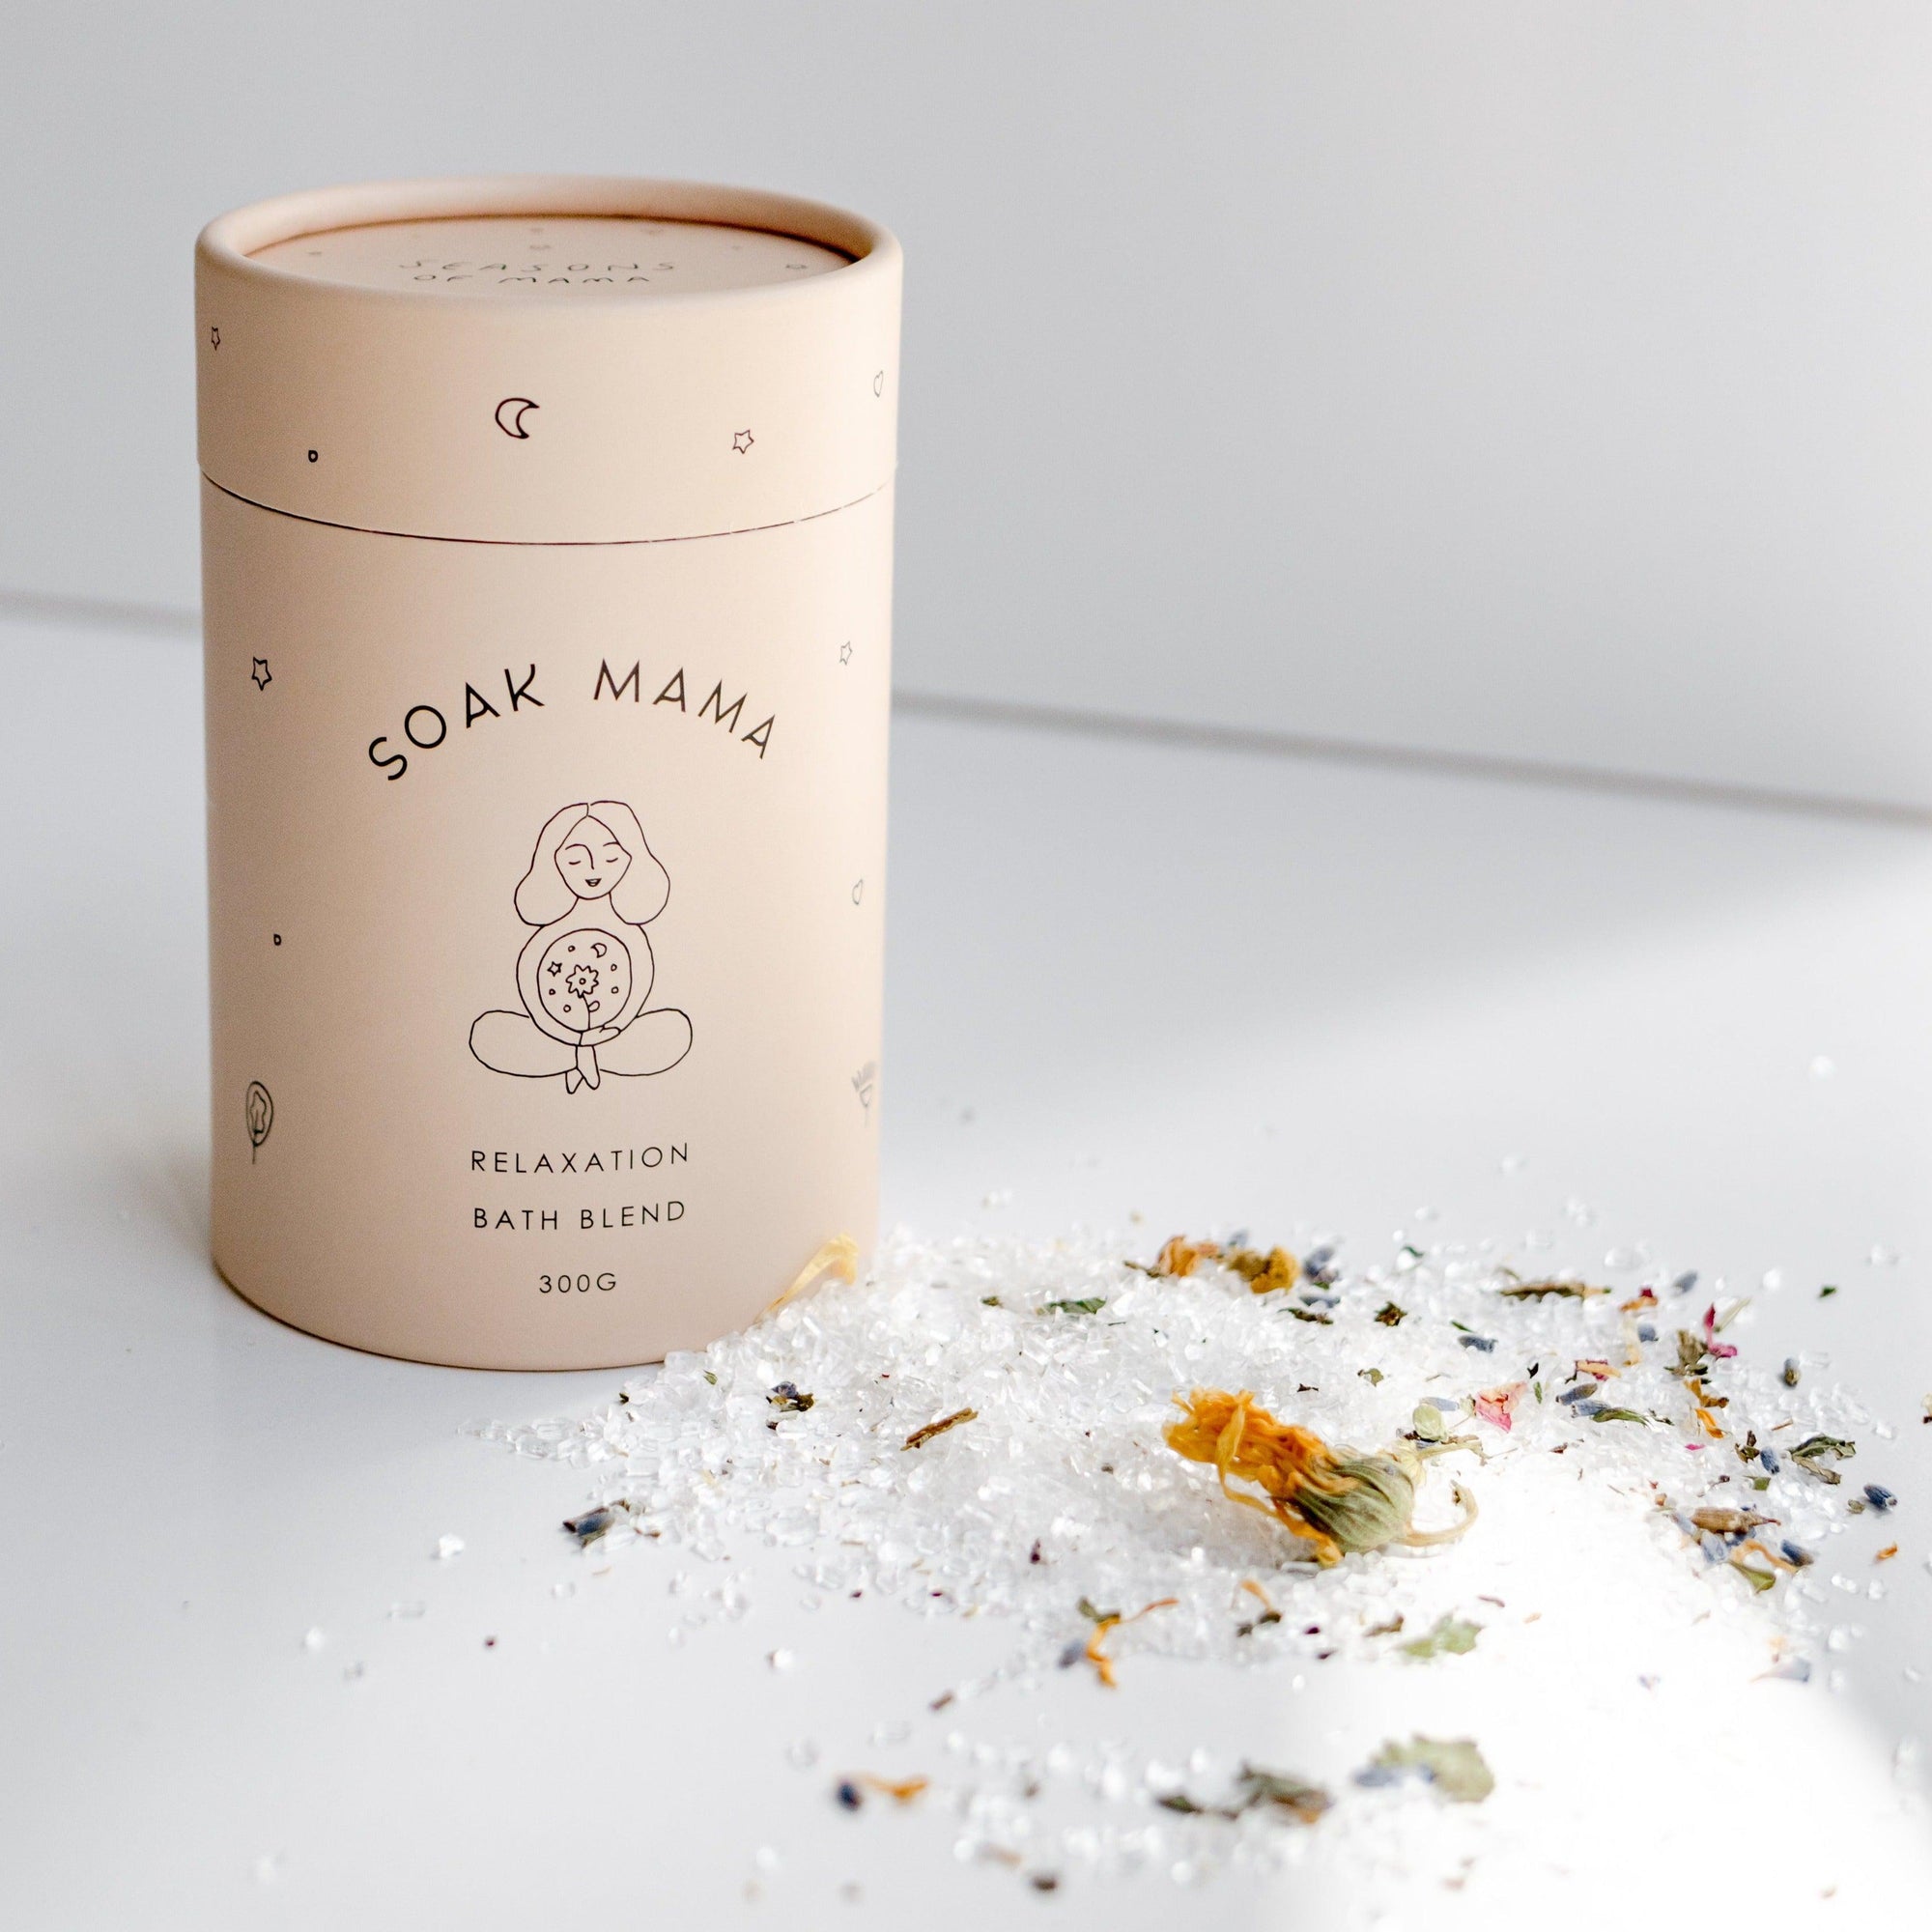 A tin of Seasons of Mama's Soak Mama Relaxation bath blend sitting on a table.